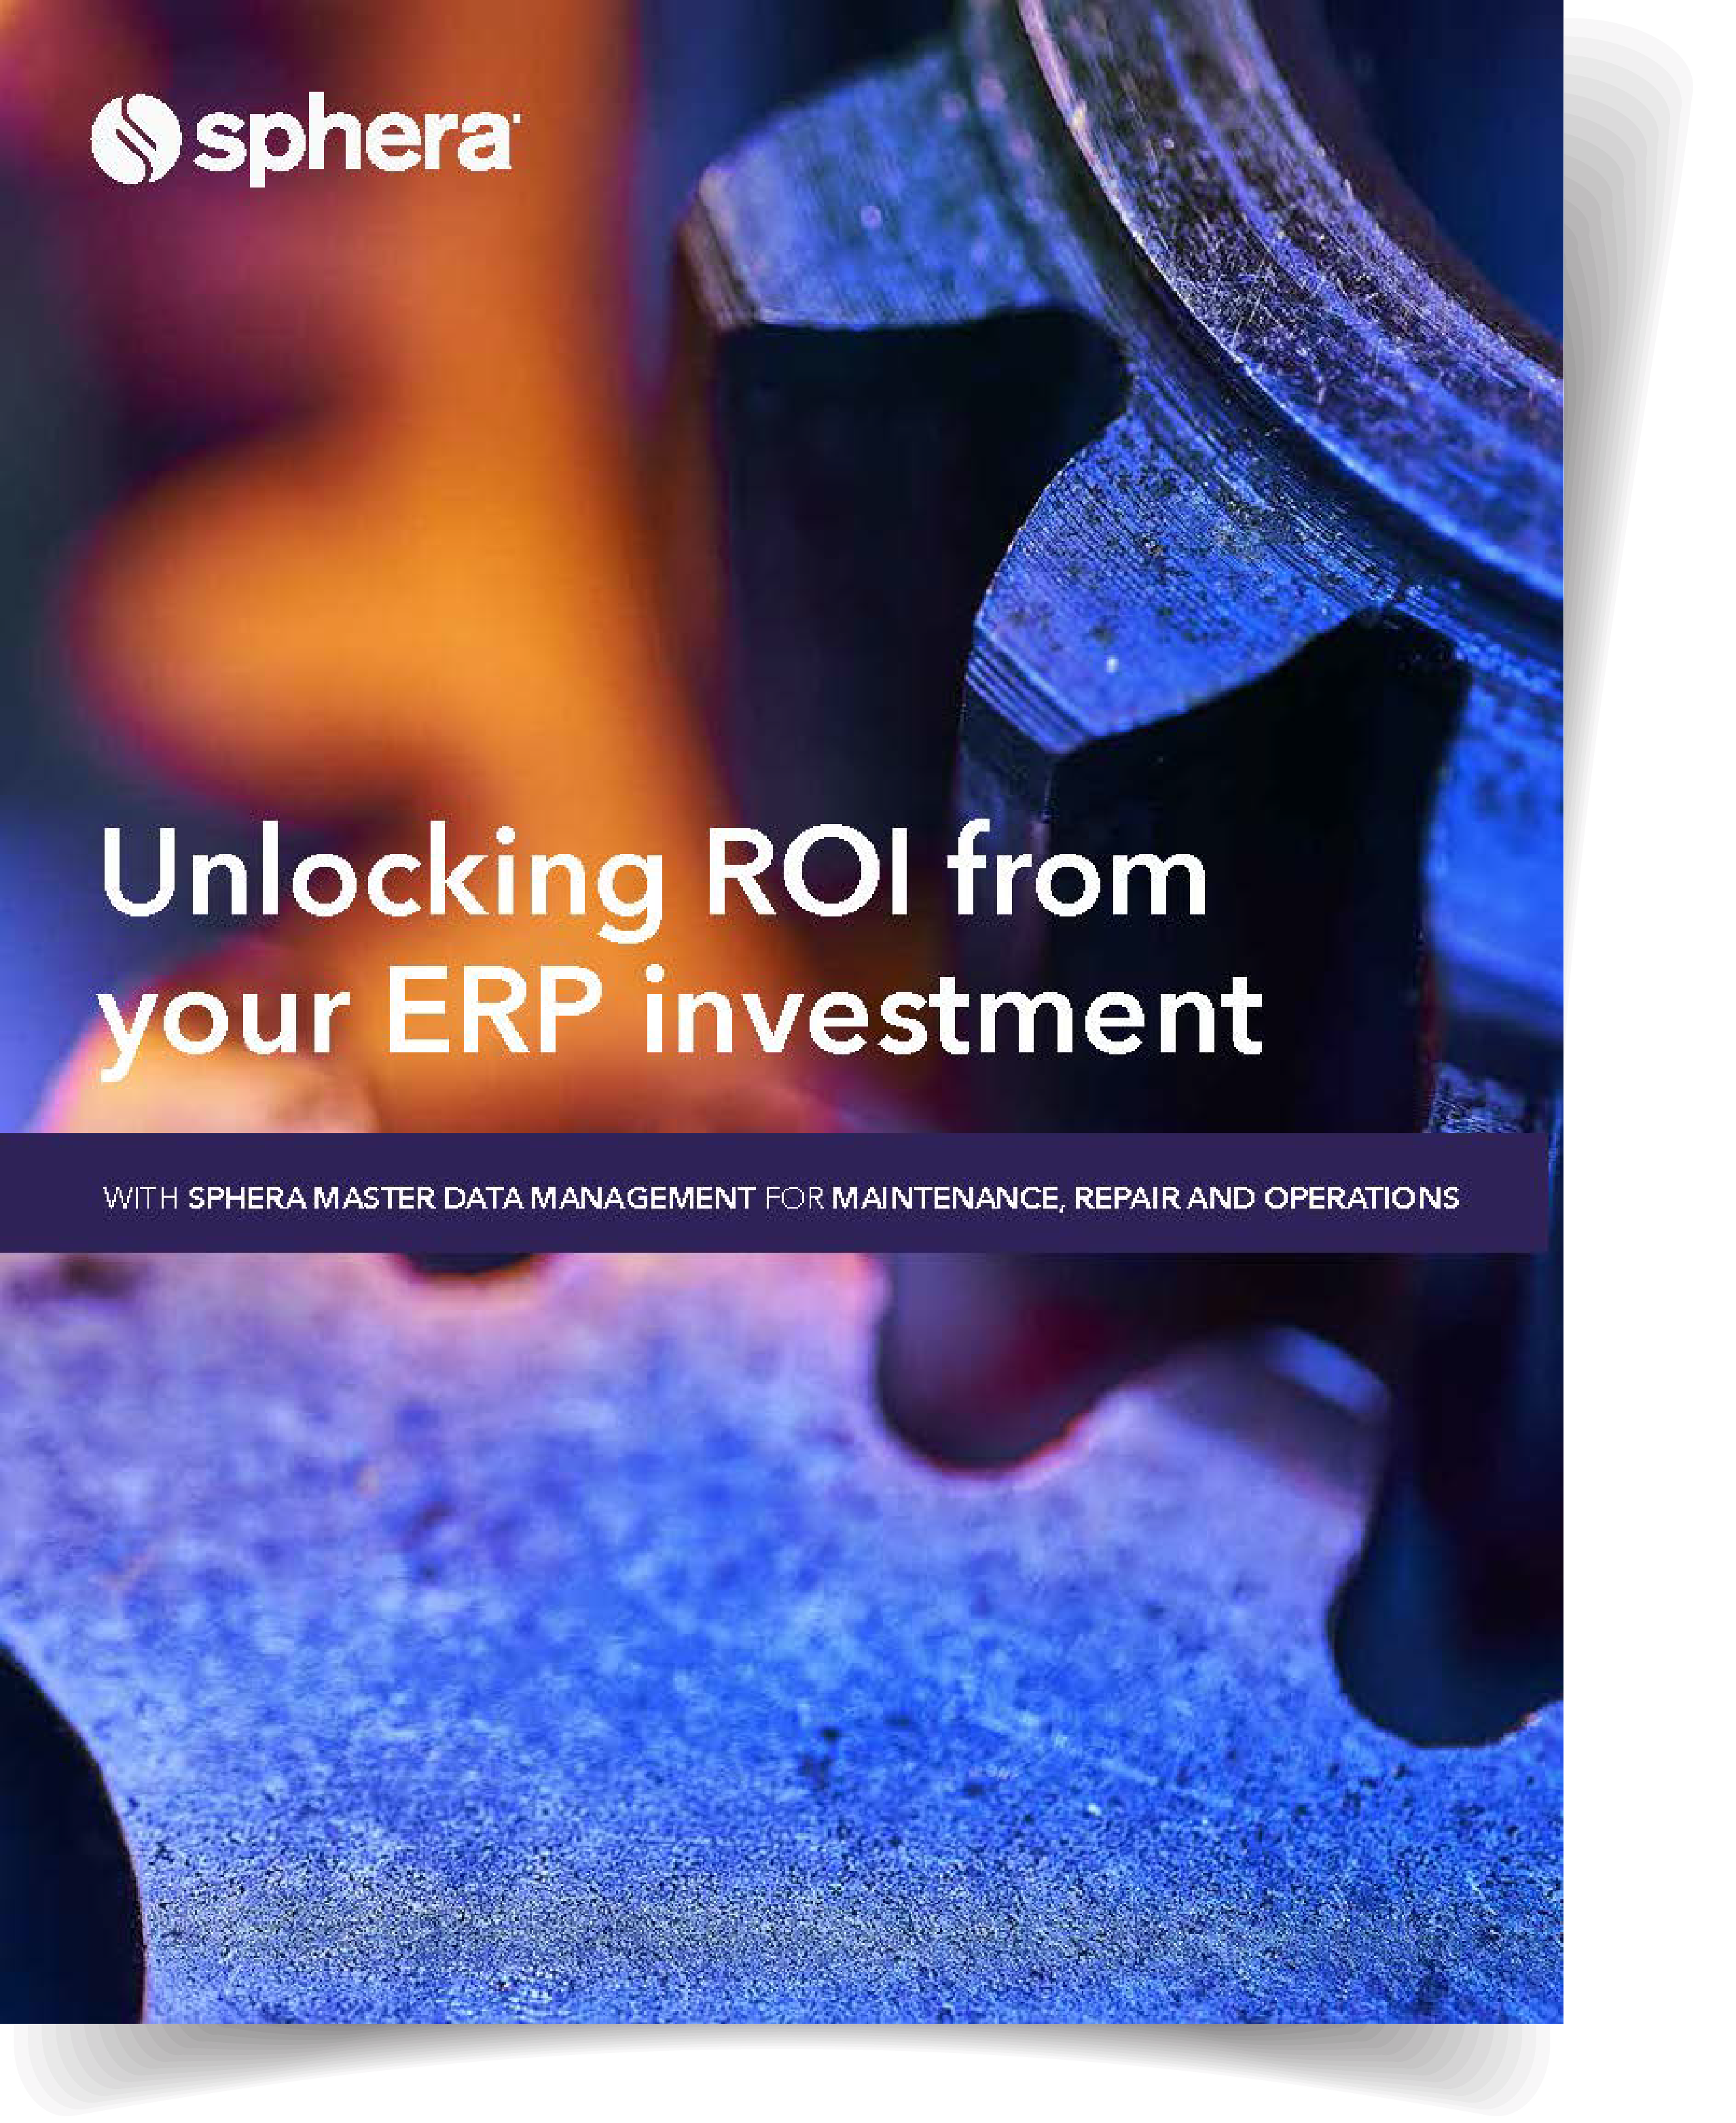 Unlocking ROI from your ERP investment with Sphera Master Data Management for Maintenance, Repair and Operations